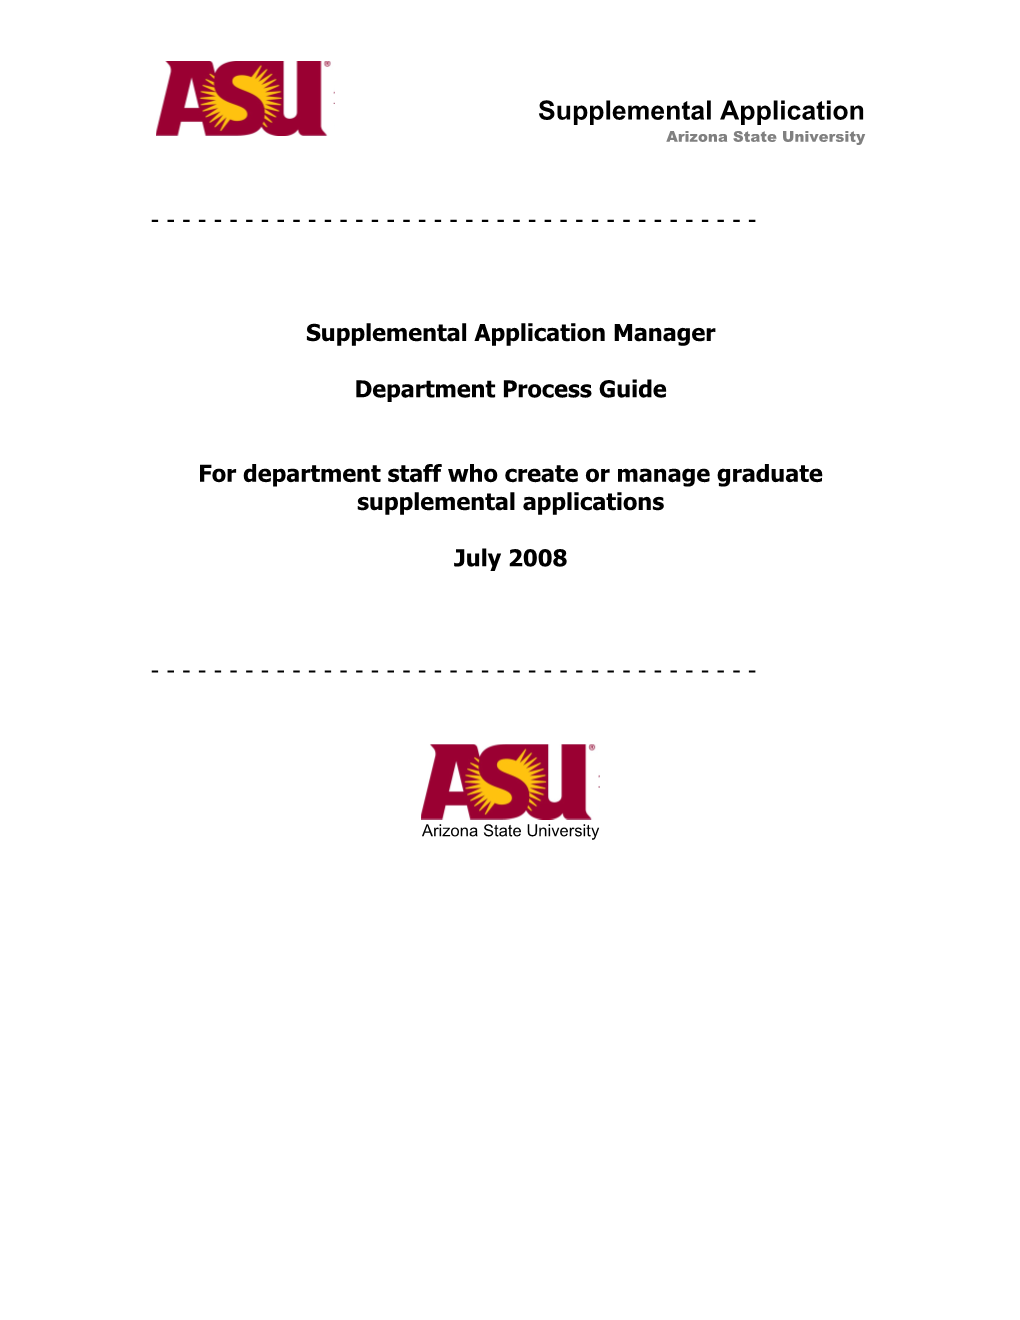 For Department Staff Who Create Or Manage Graduate Supplemental Applications